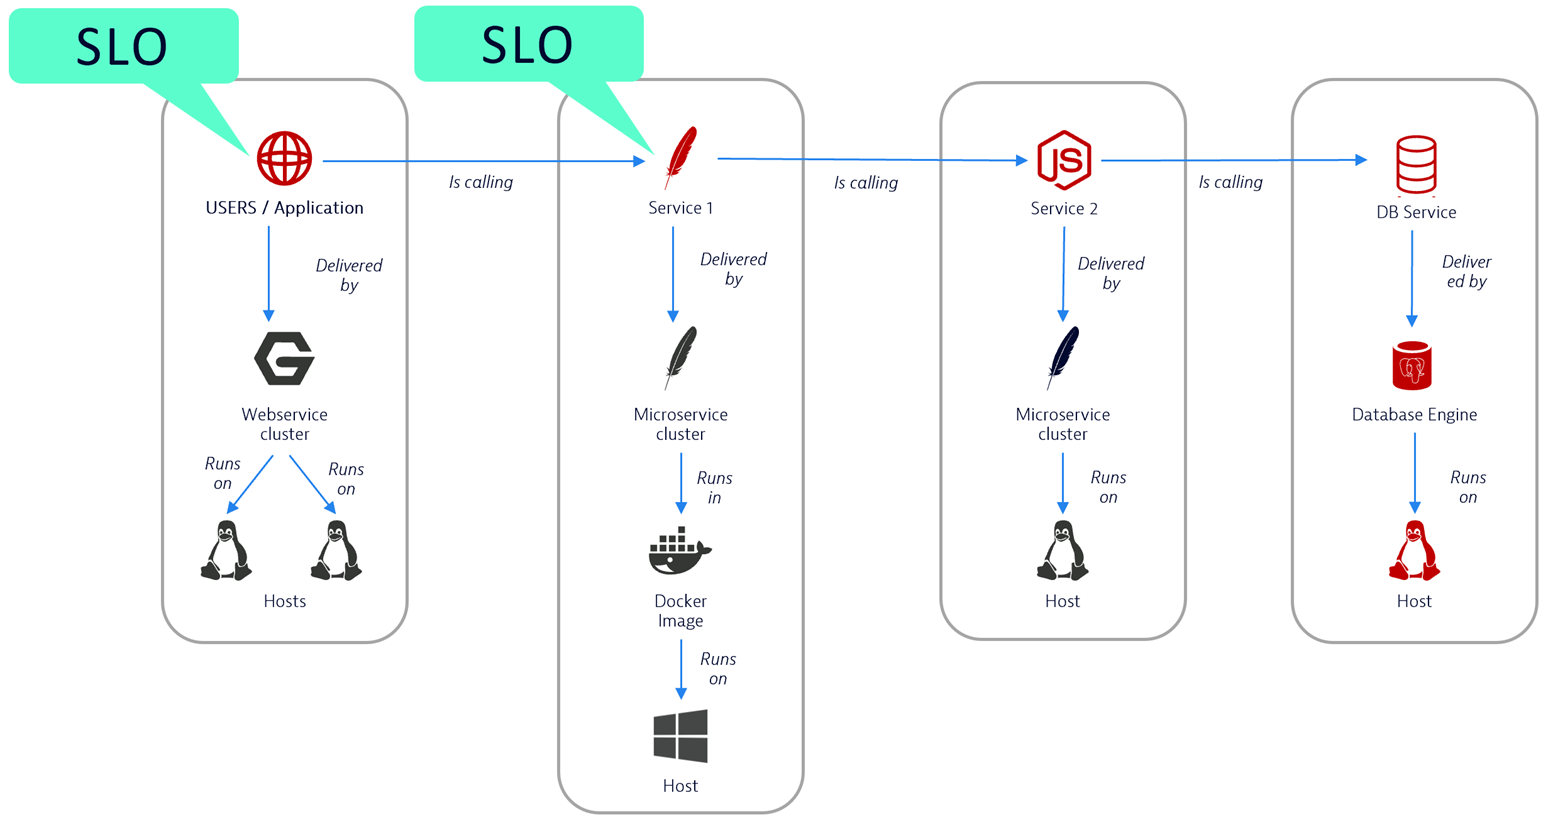 When setting up SLO monitoring using error budget burn rates, focus on front-end services